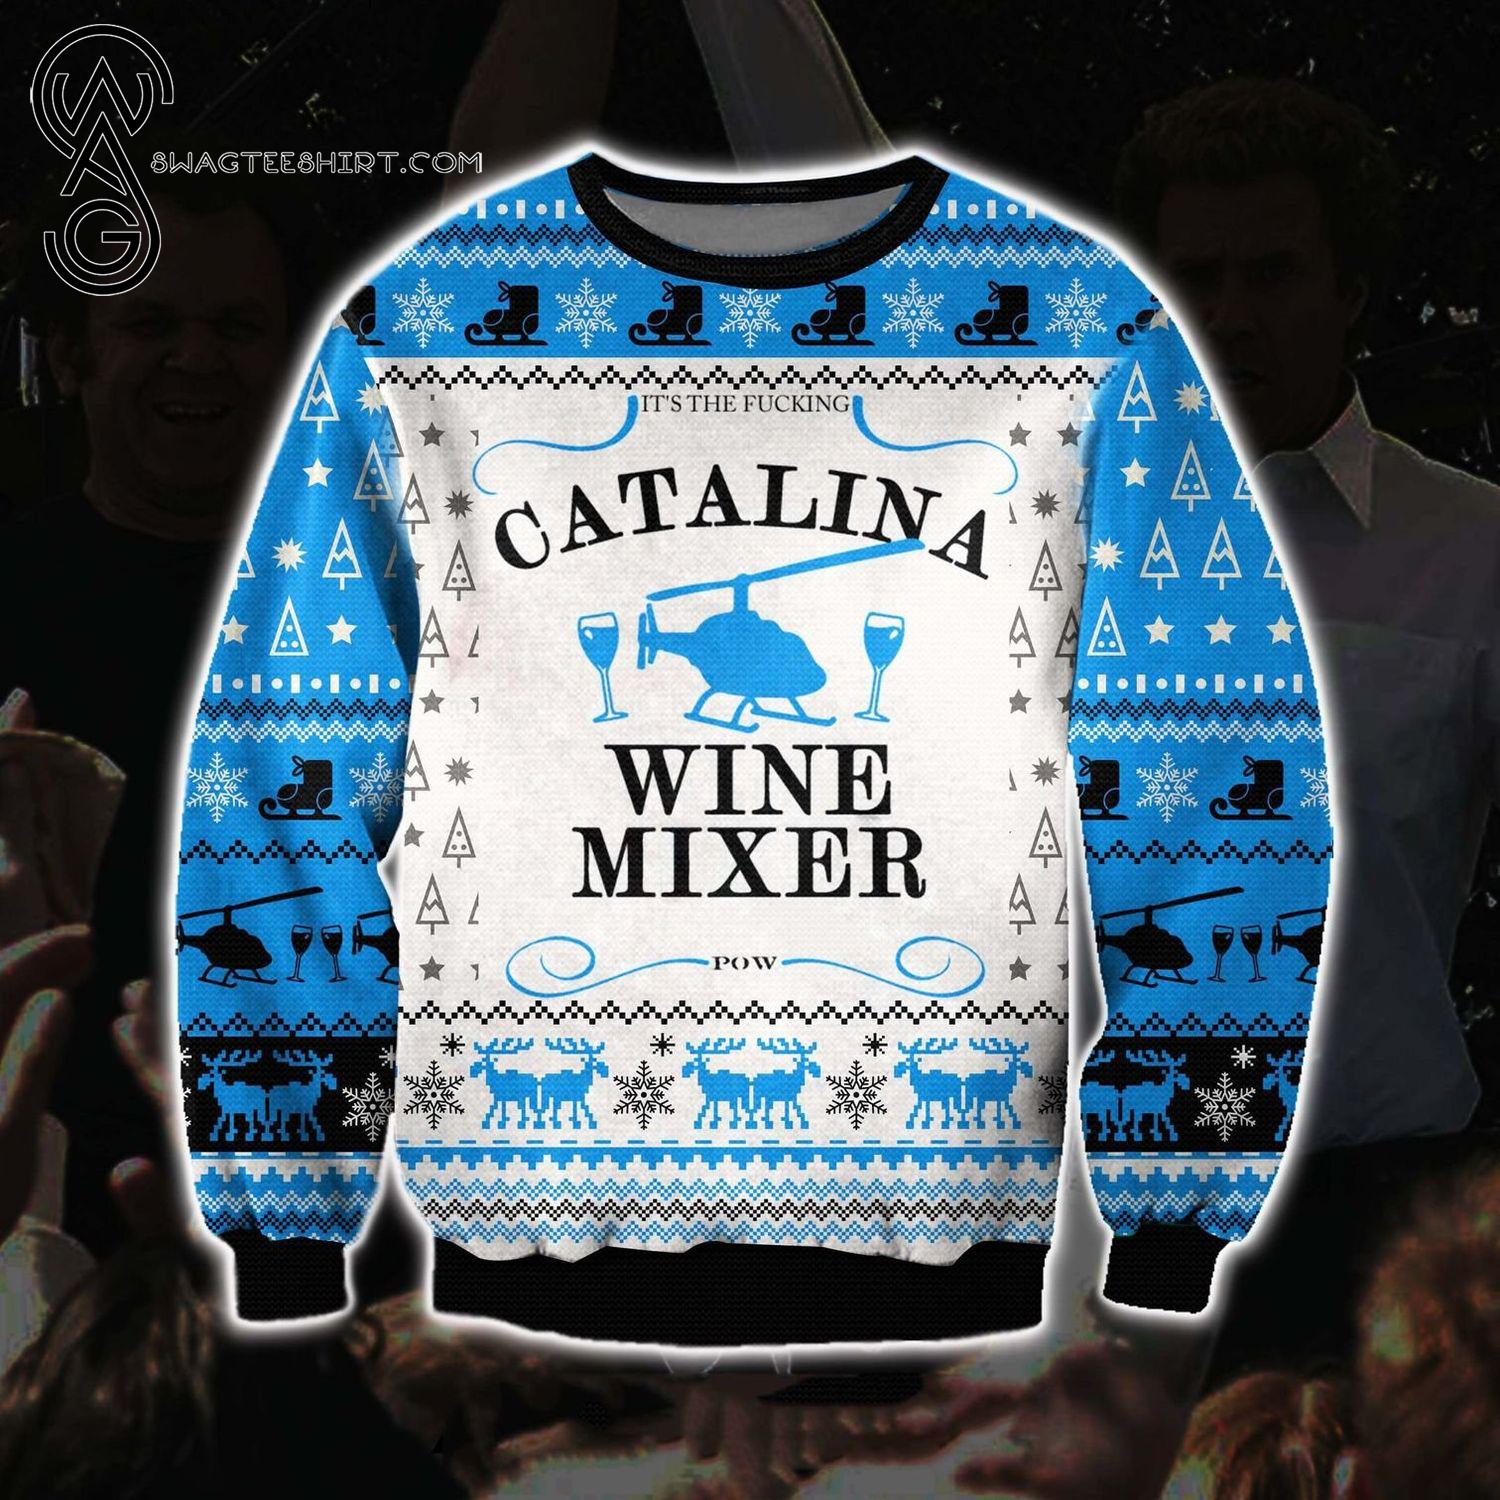 The Catalina Wine Mixer Full Print Ugly Christmas Sweater